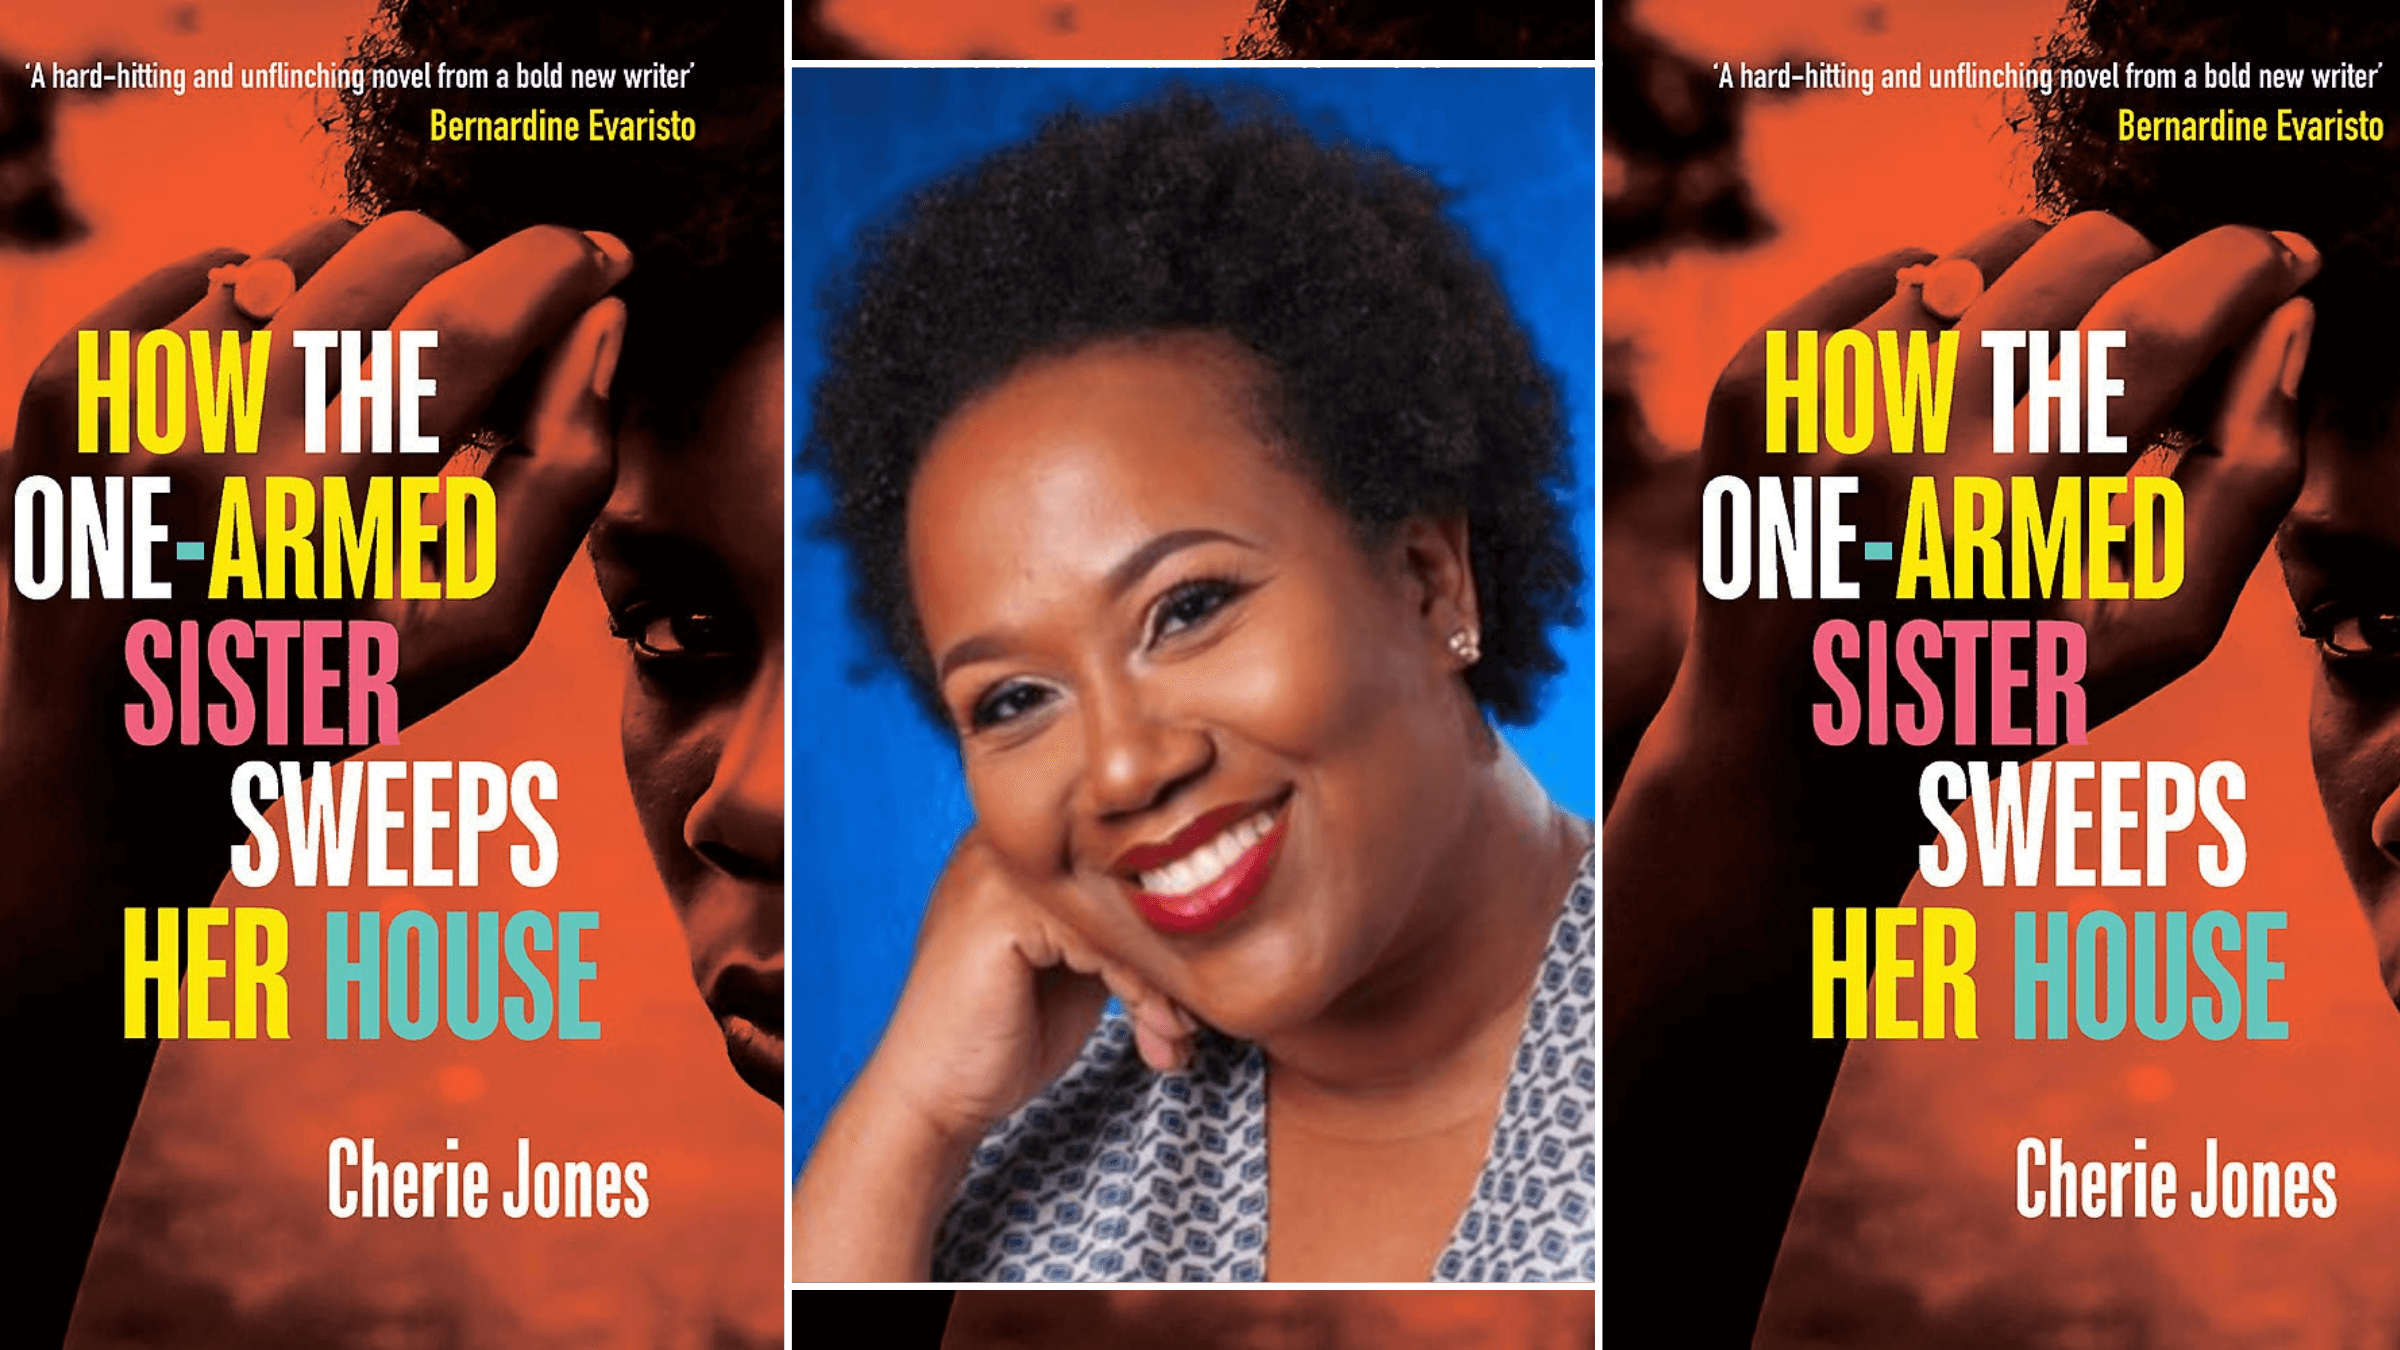 How The One-Armed Sister Sweeps Her House by Cherie Jones: Extract